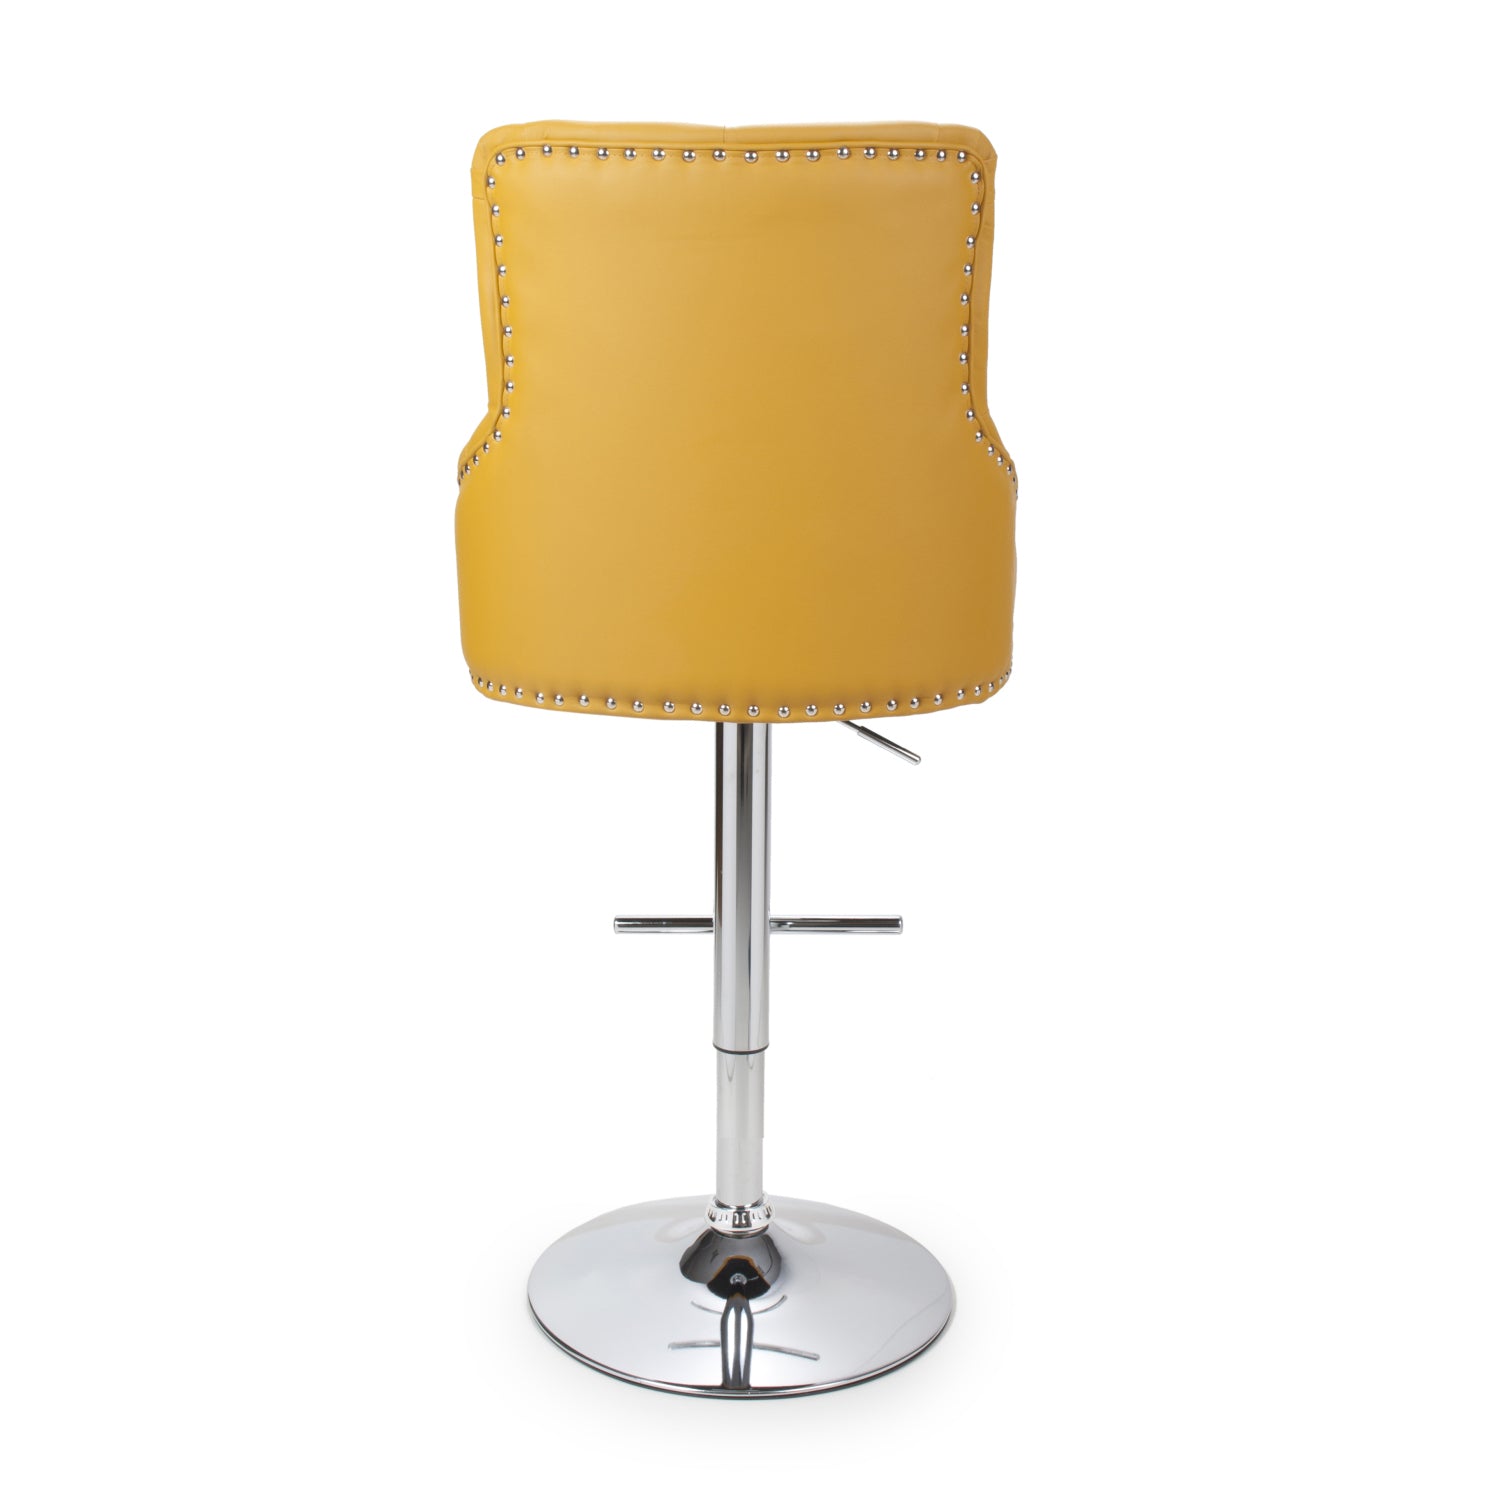 Rocco leather effect adjustable bar stools from Top Secret Furniture